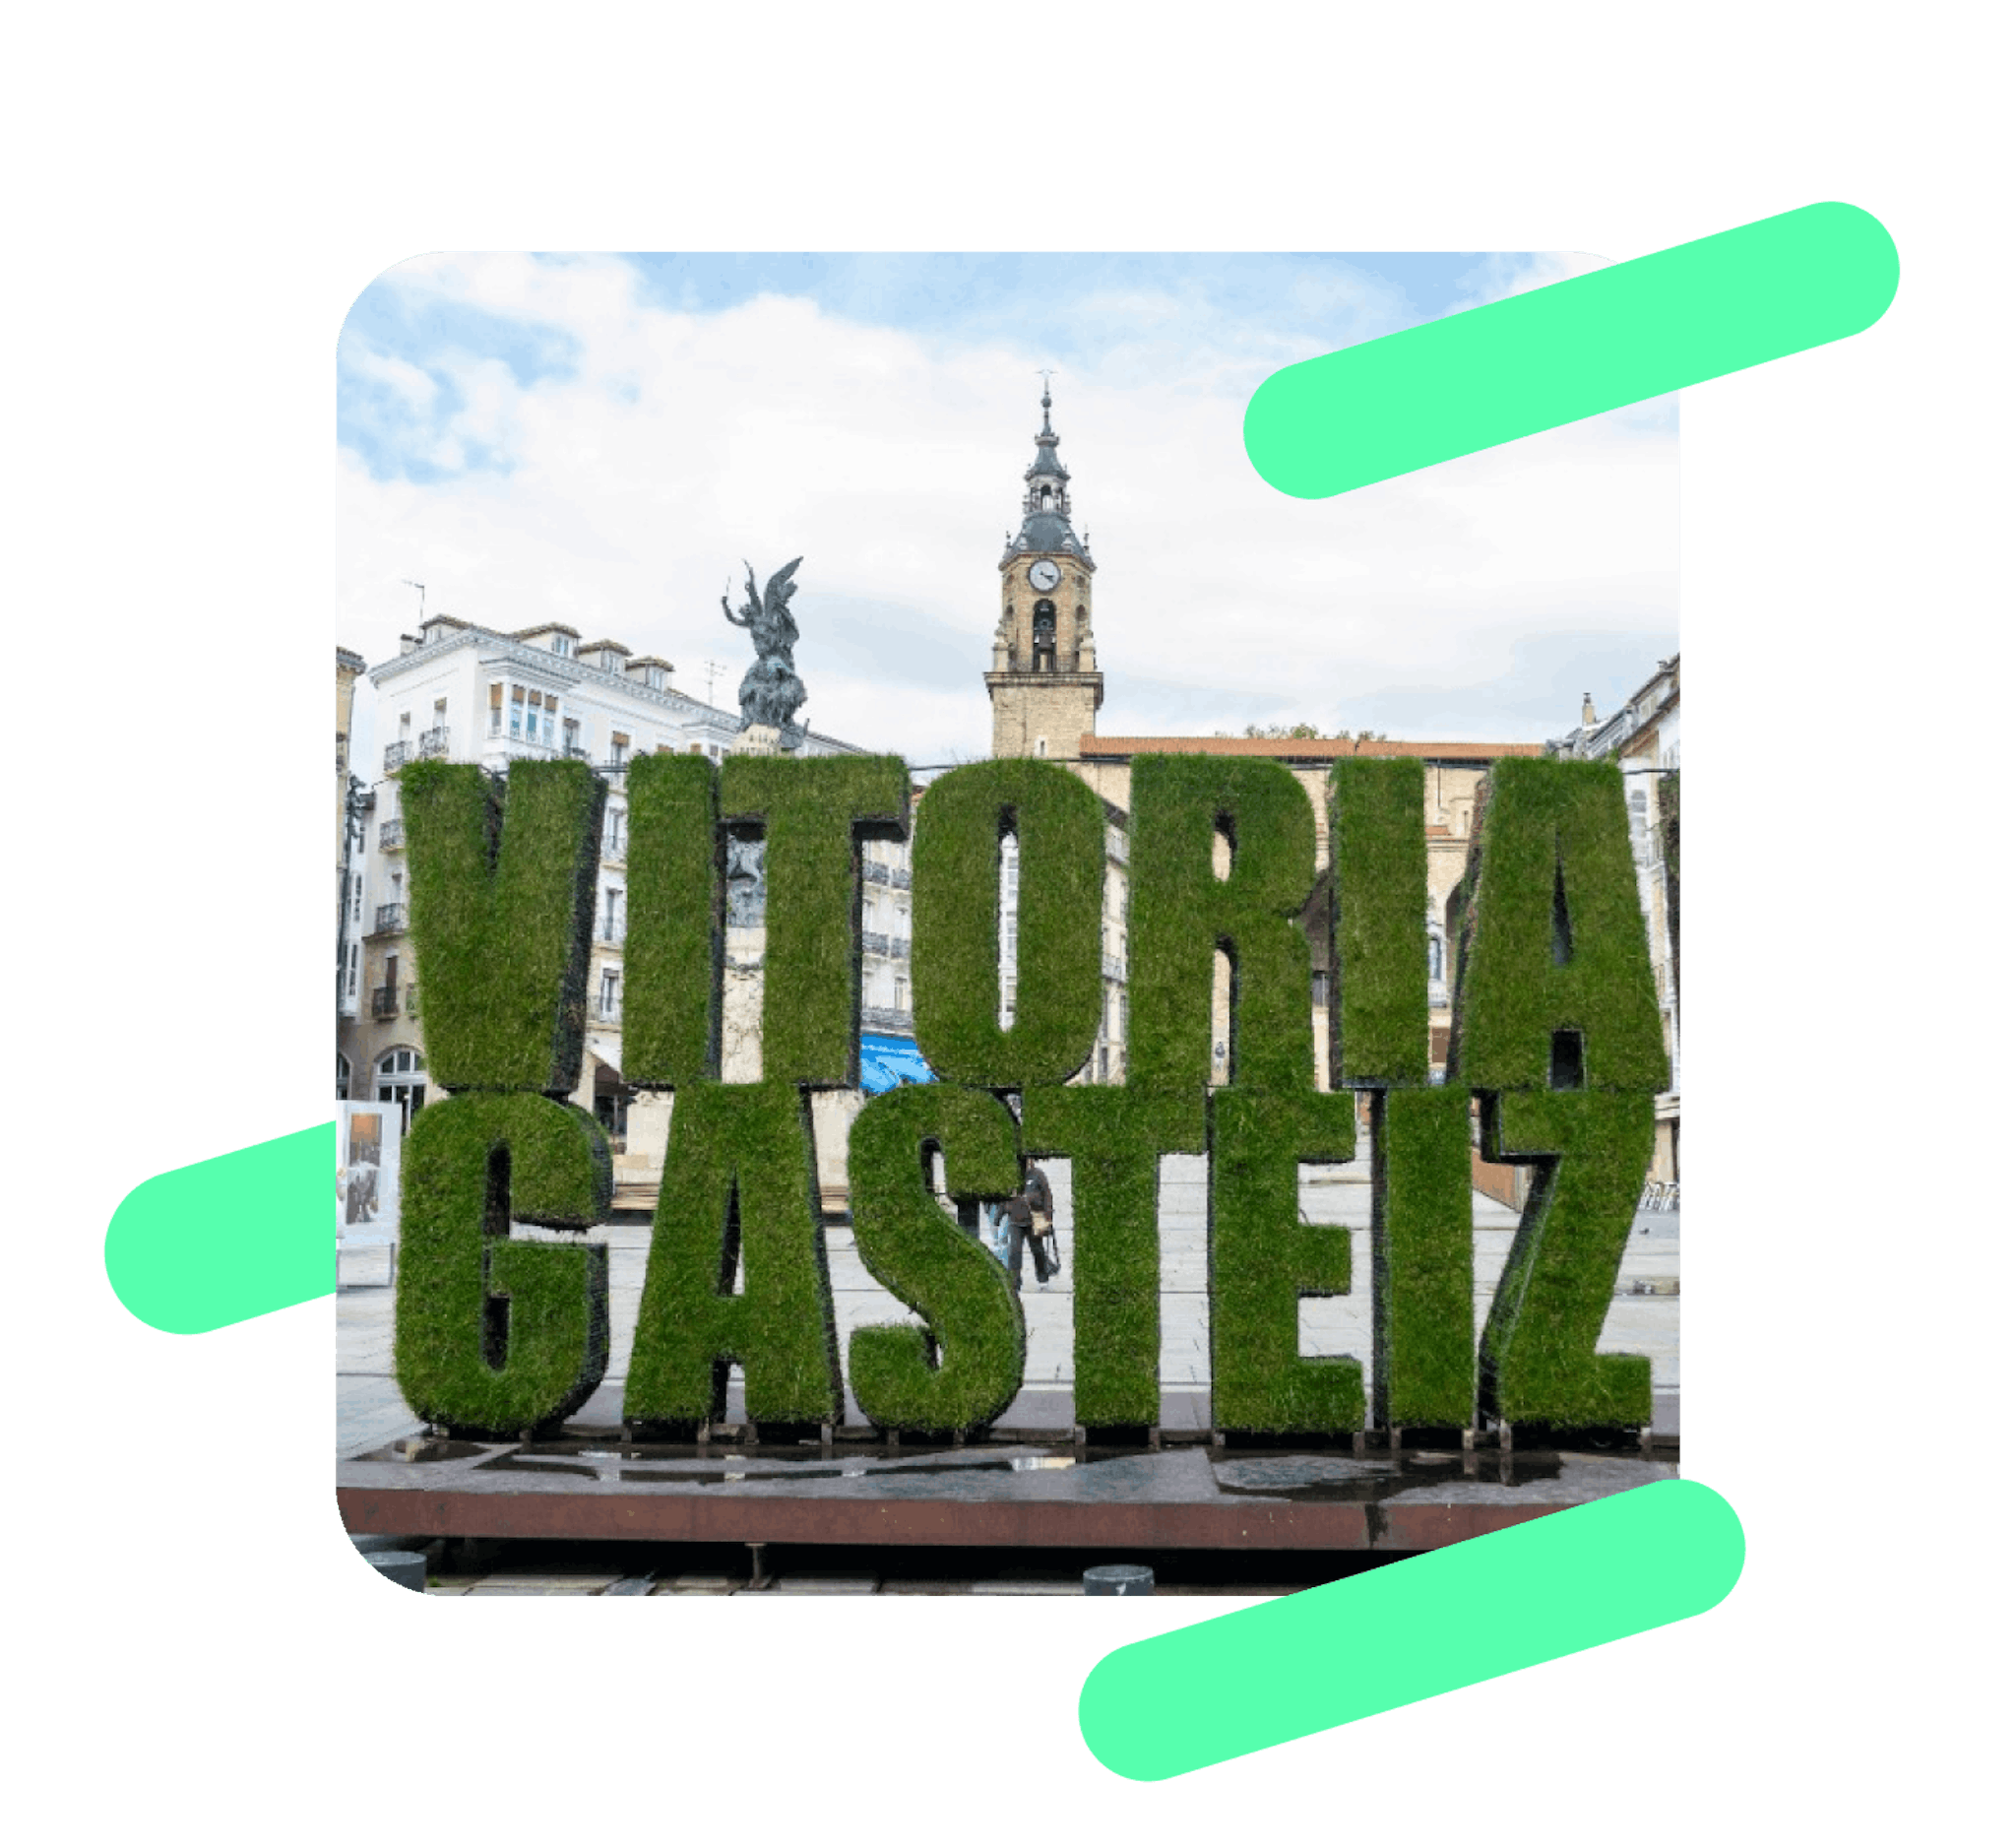 In addition to guaranteeing your rent, we rent your apartment in Gasteiz / Vitoria 